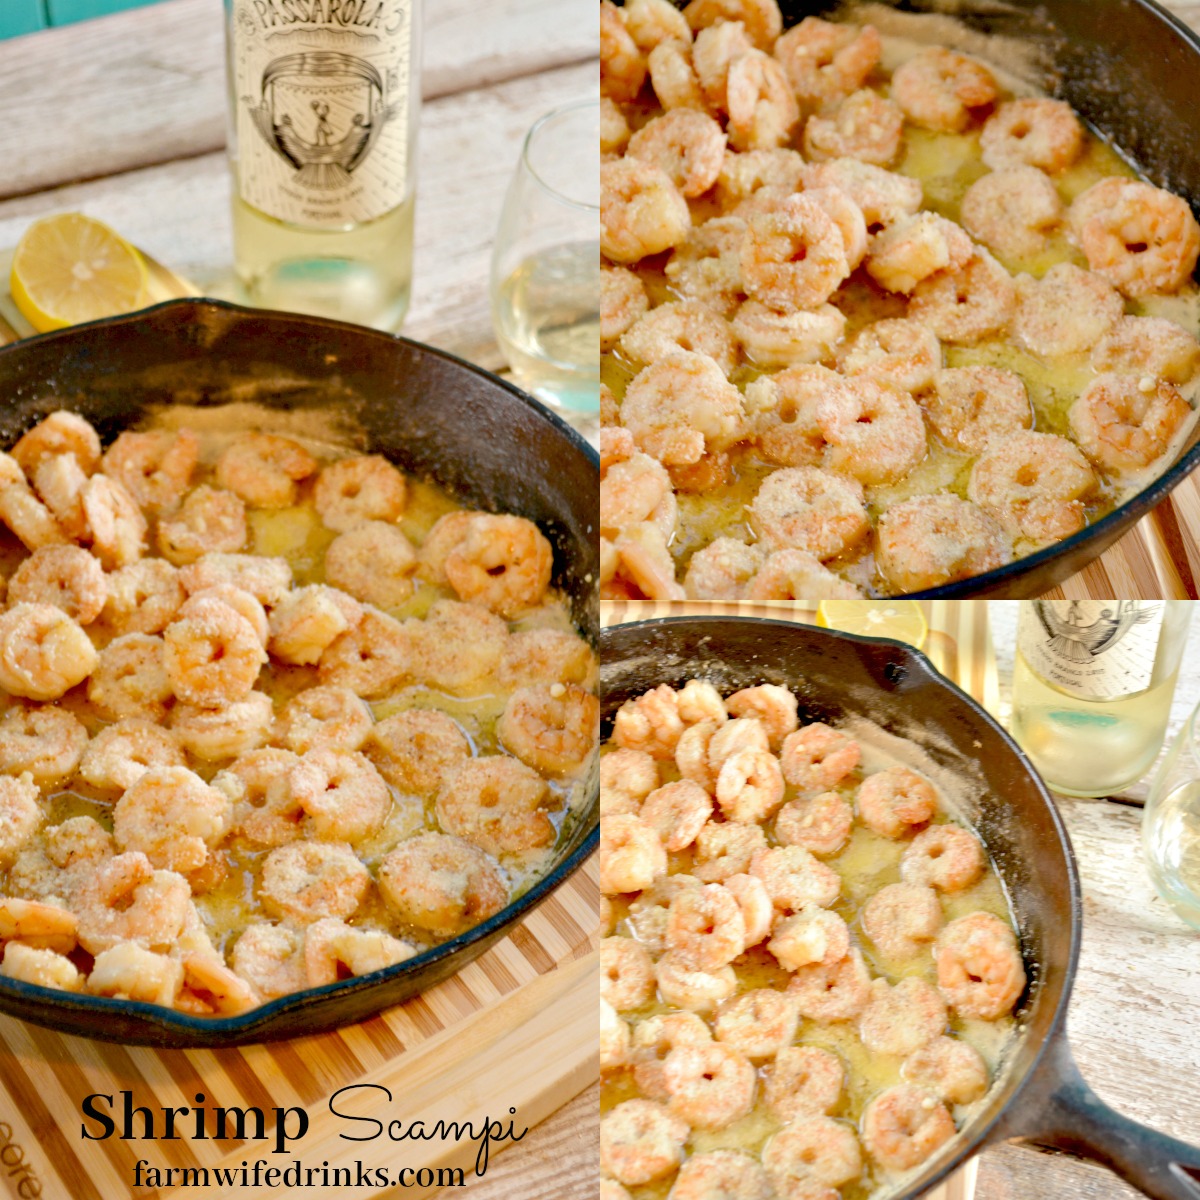 Shrimp Scampi with a white wine butter sauce is a 20 minute meal that can served with some pasta to be a hit busy weeknight meal.